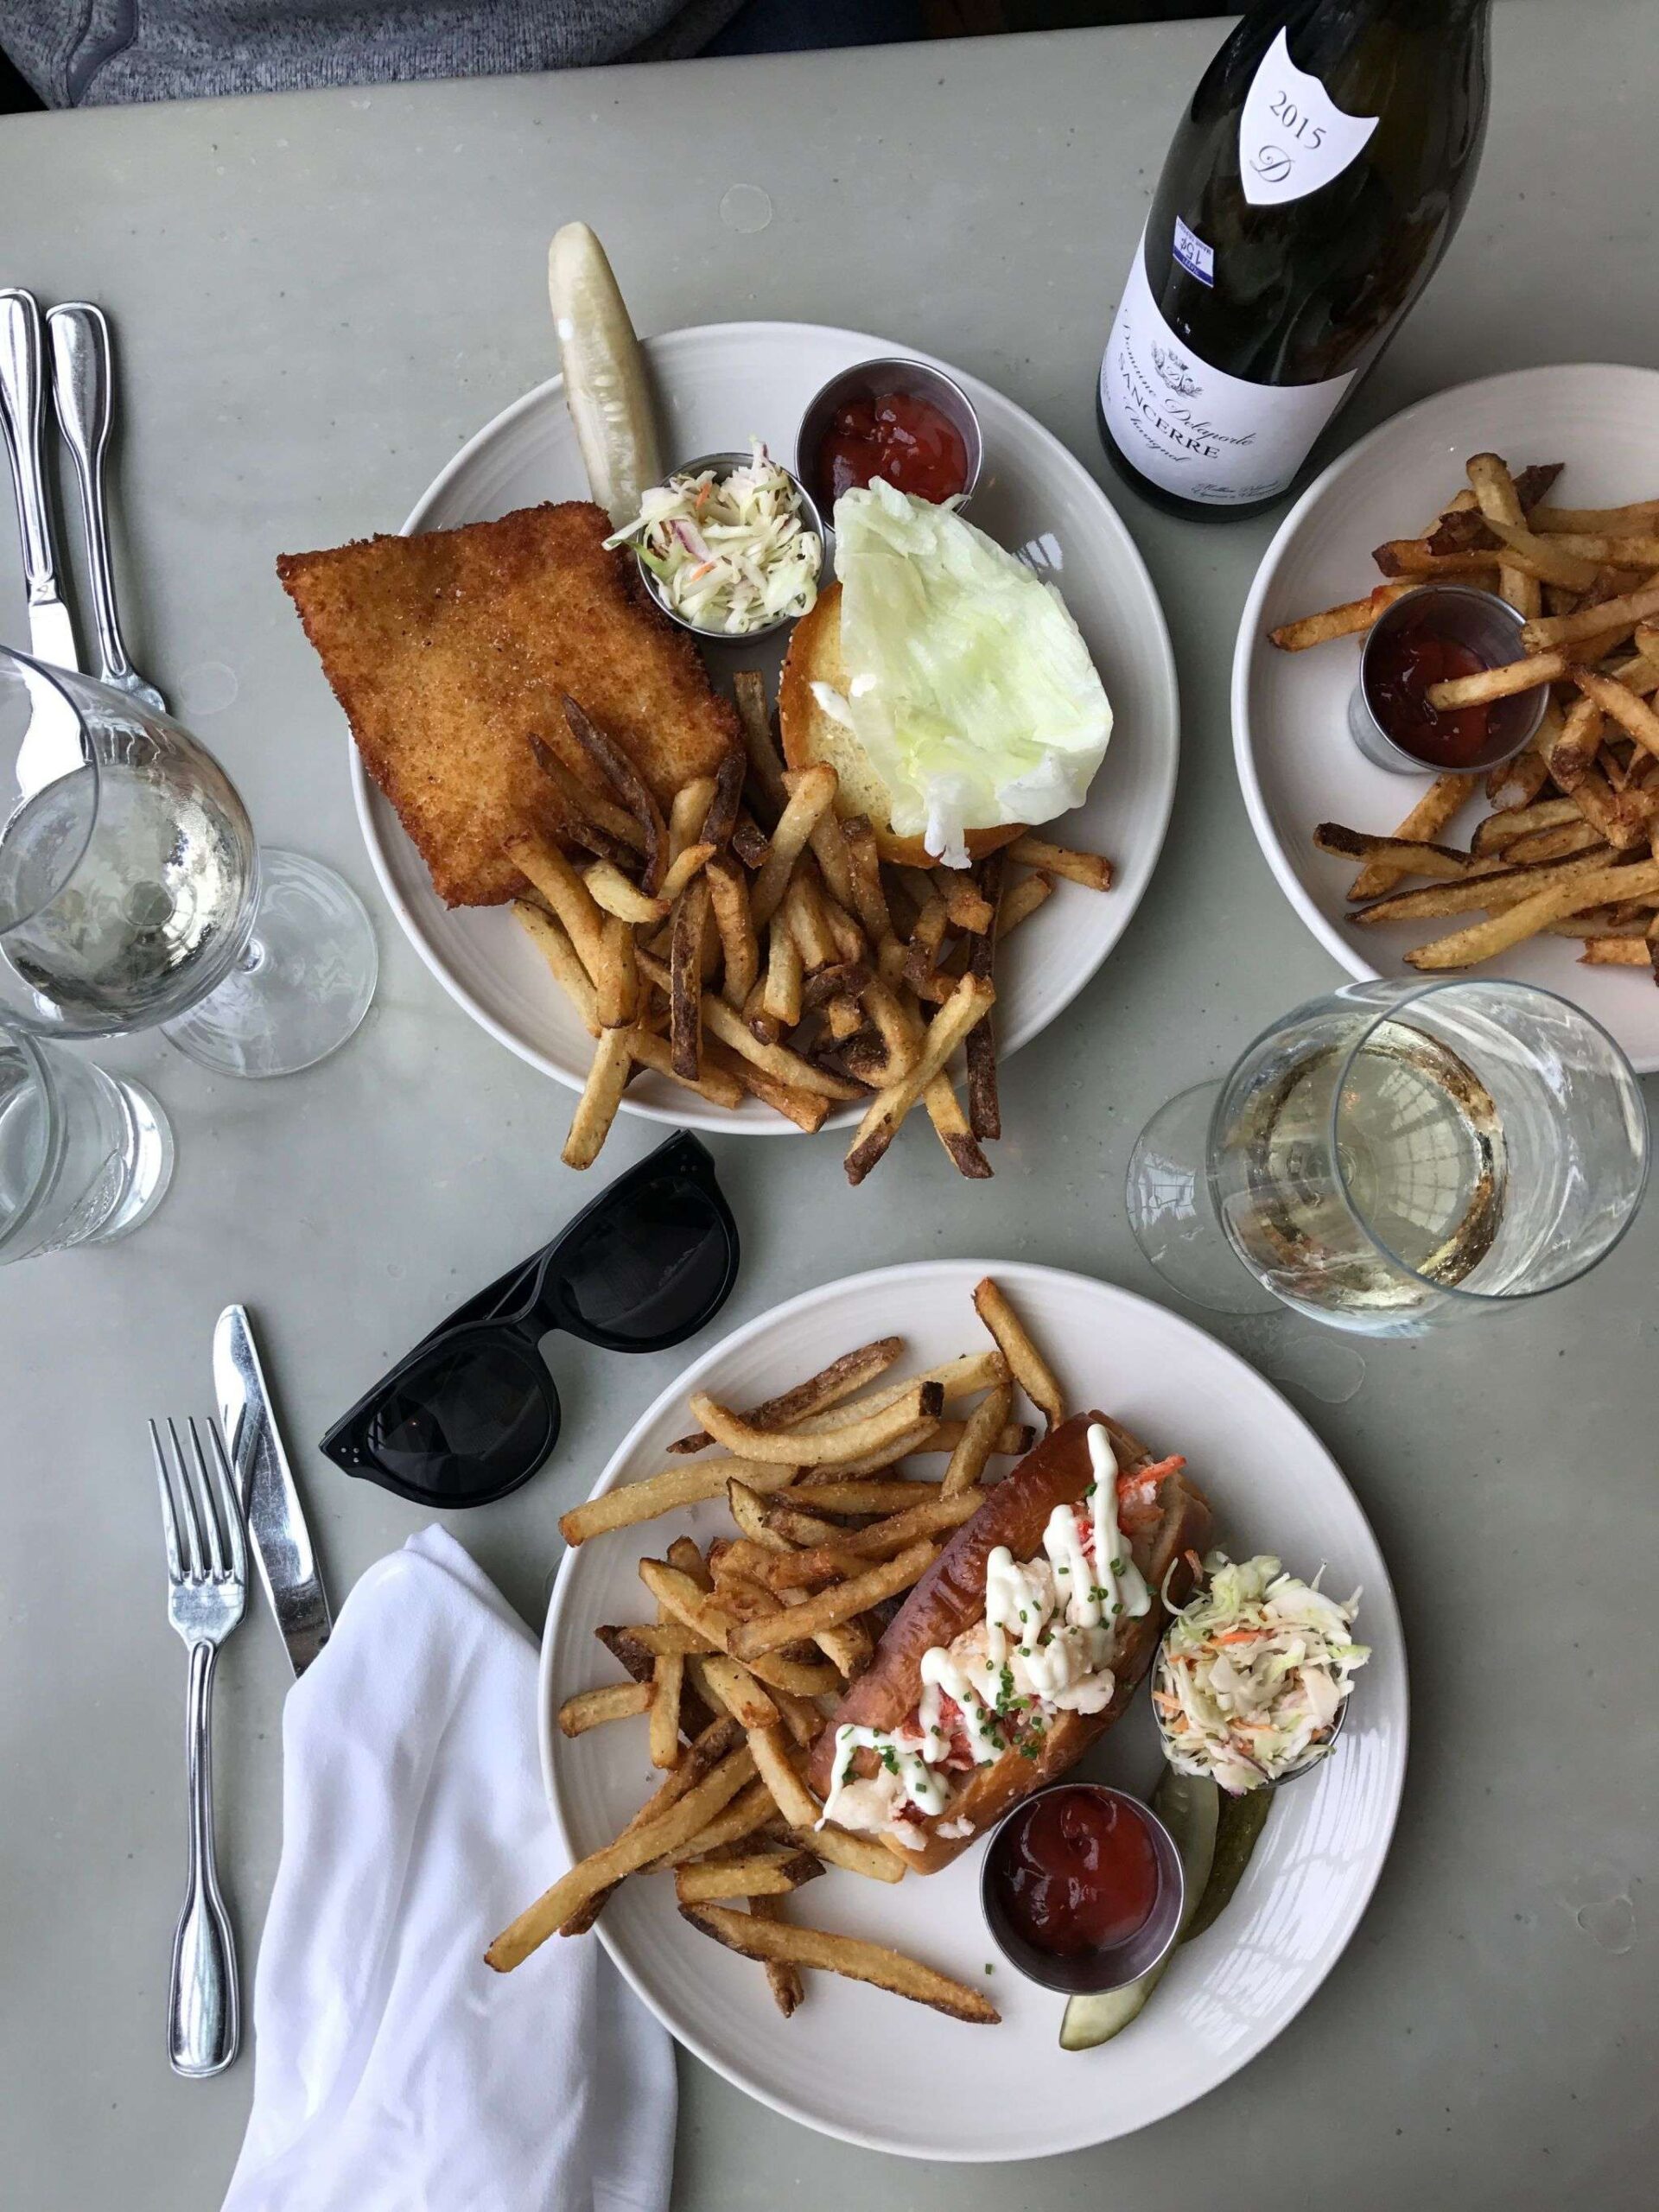 Travel blogger Meaghan Murray shares a restaurant review for Scales in Portland, ME on her blog The Stopover